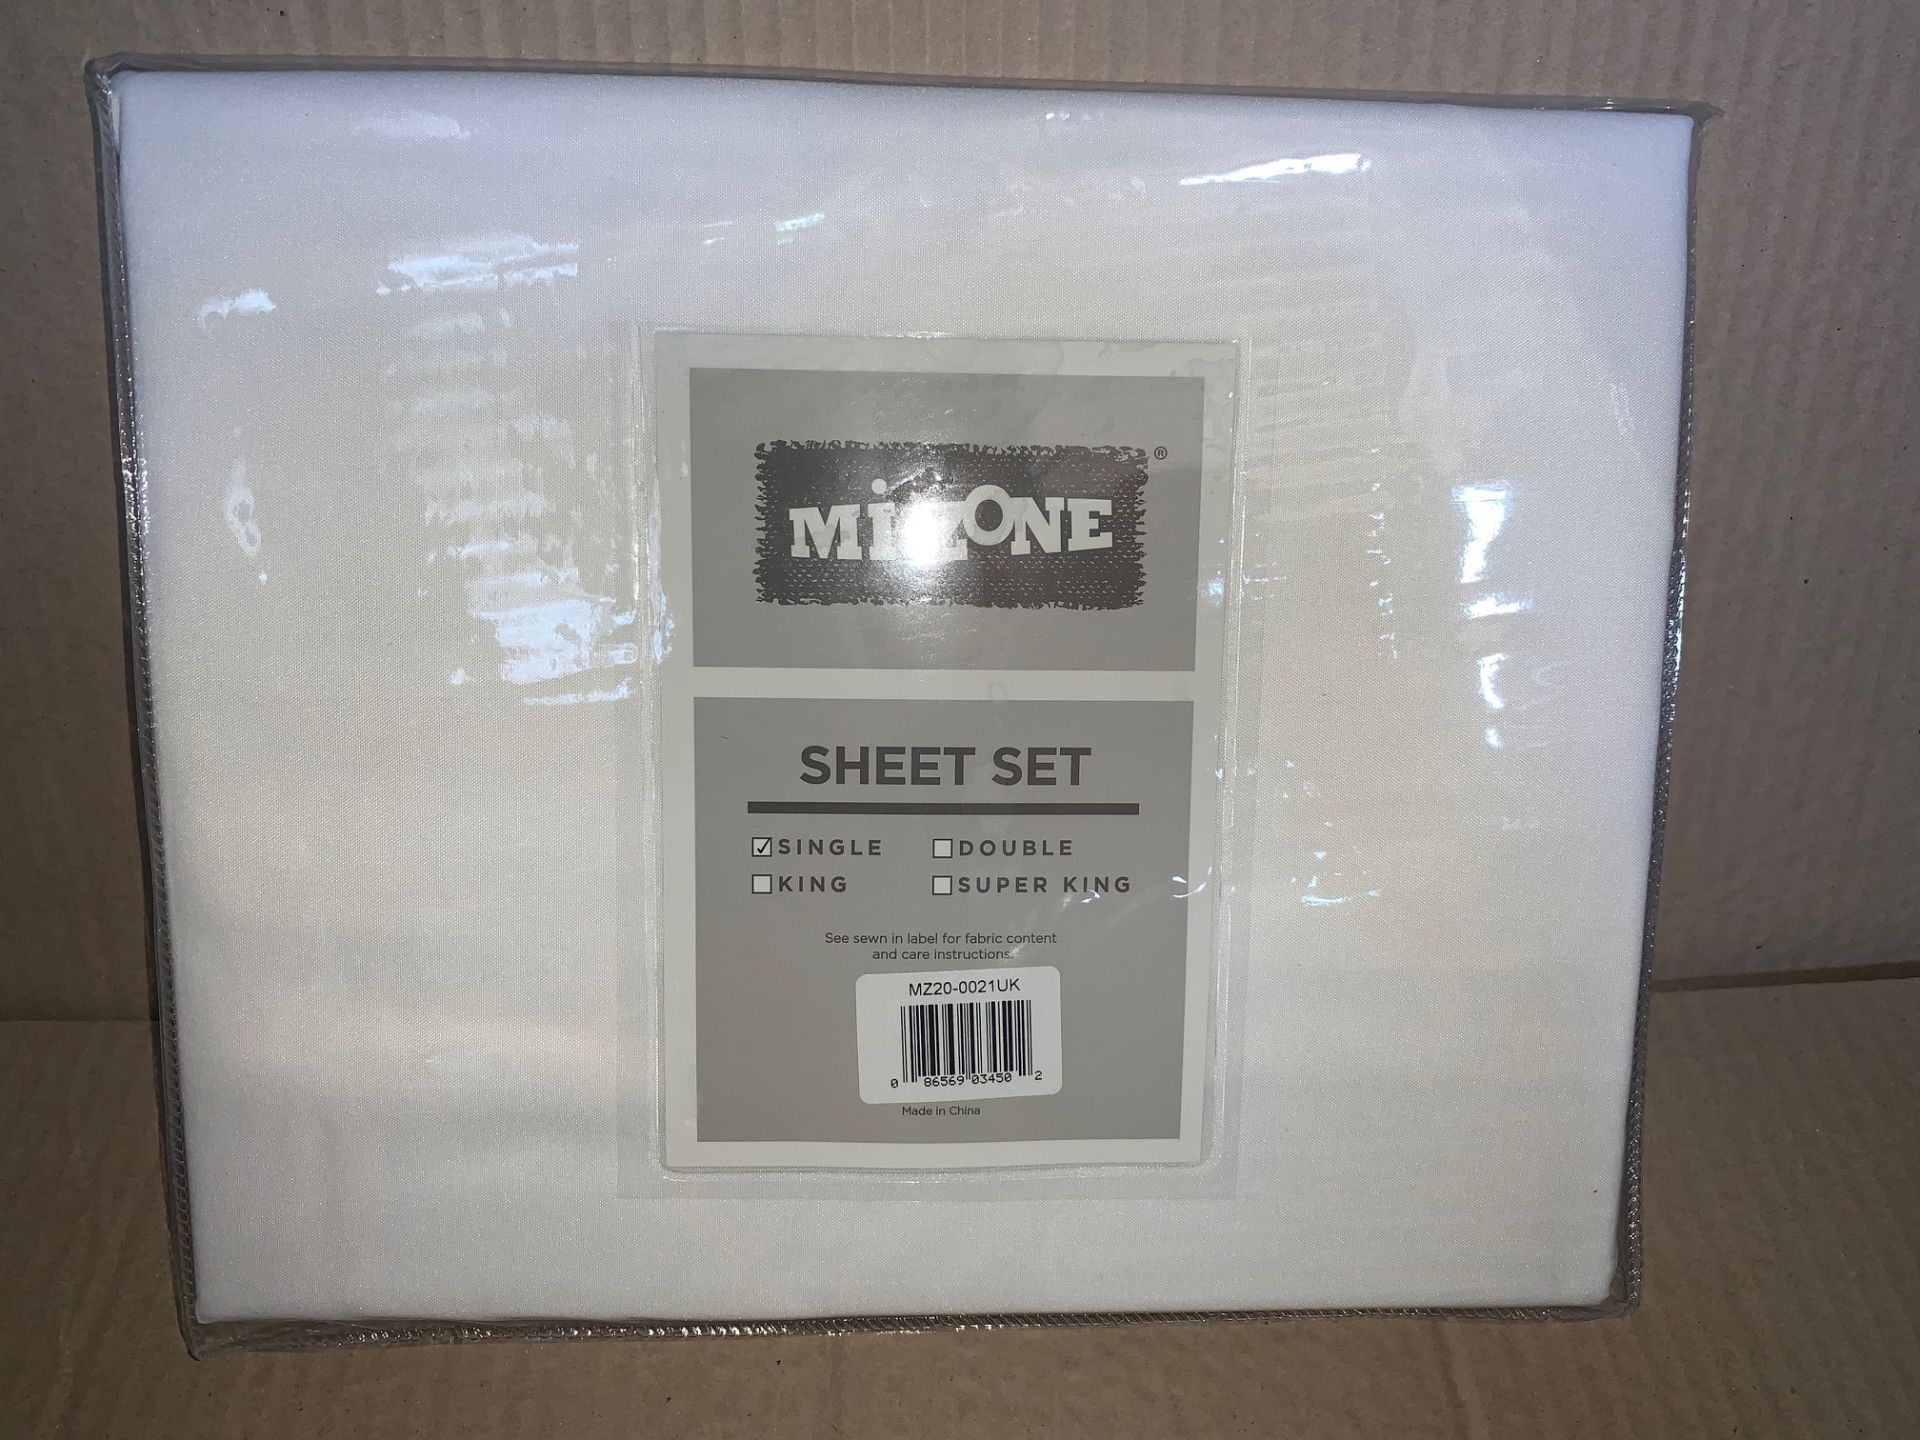 3 x Mi-Zone Single Sheet Sets White - Includes Fitted Sheet, Flat Sheet and Pillowcases - Product